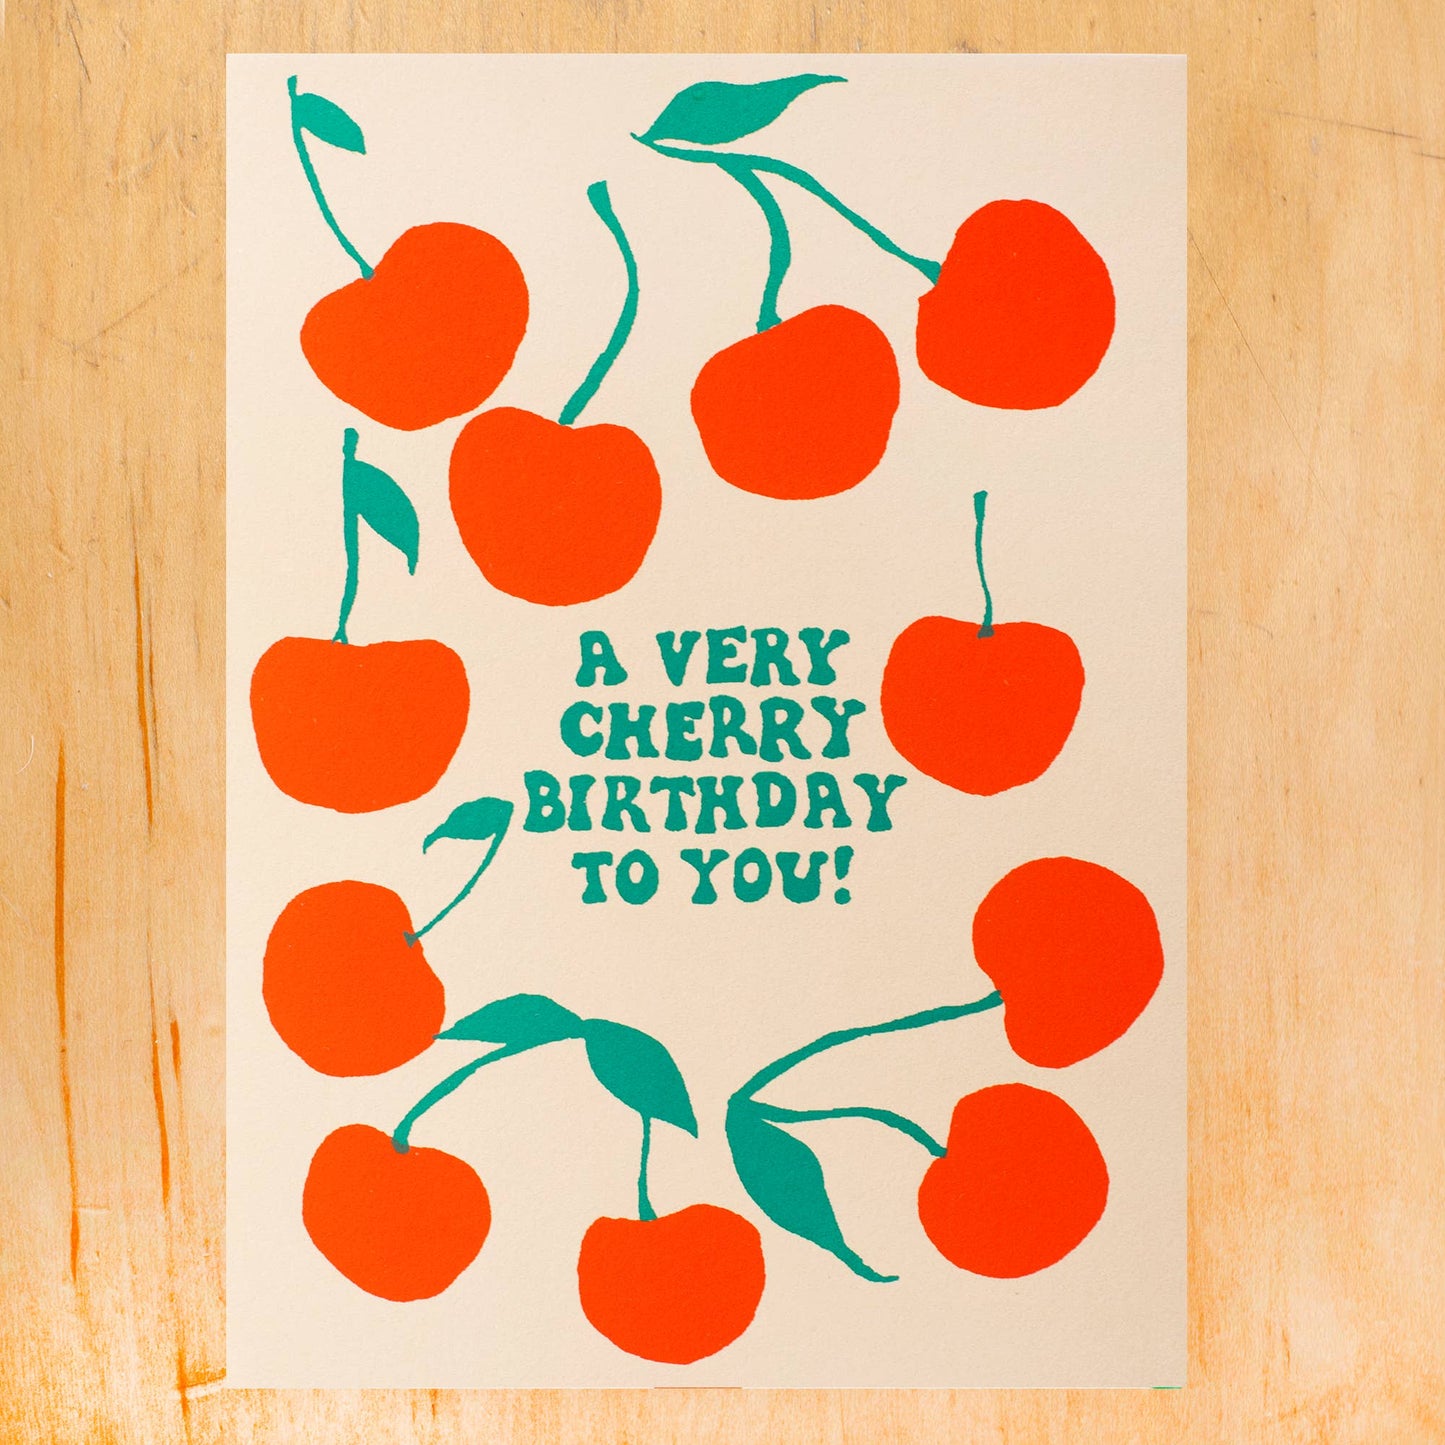 Birthday card that reads "A very cherry birthday to you!" and has red cherries all over